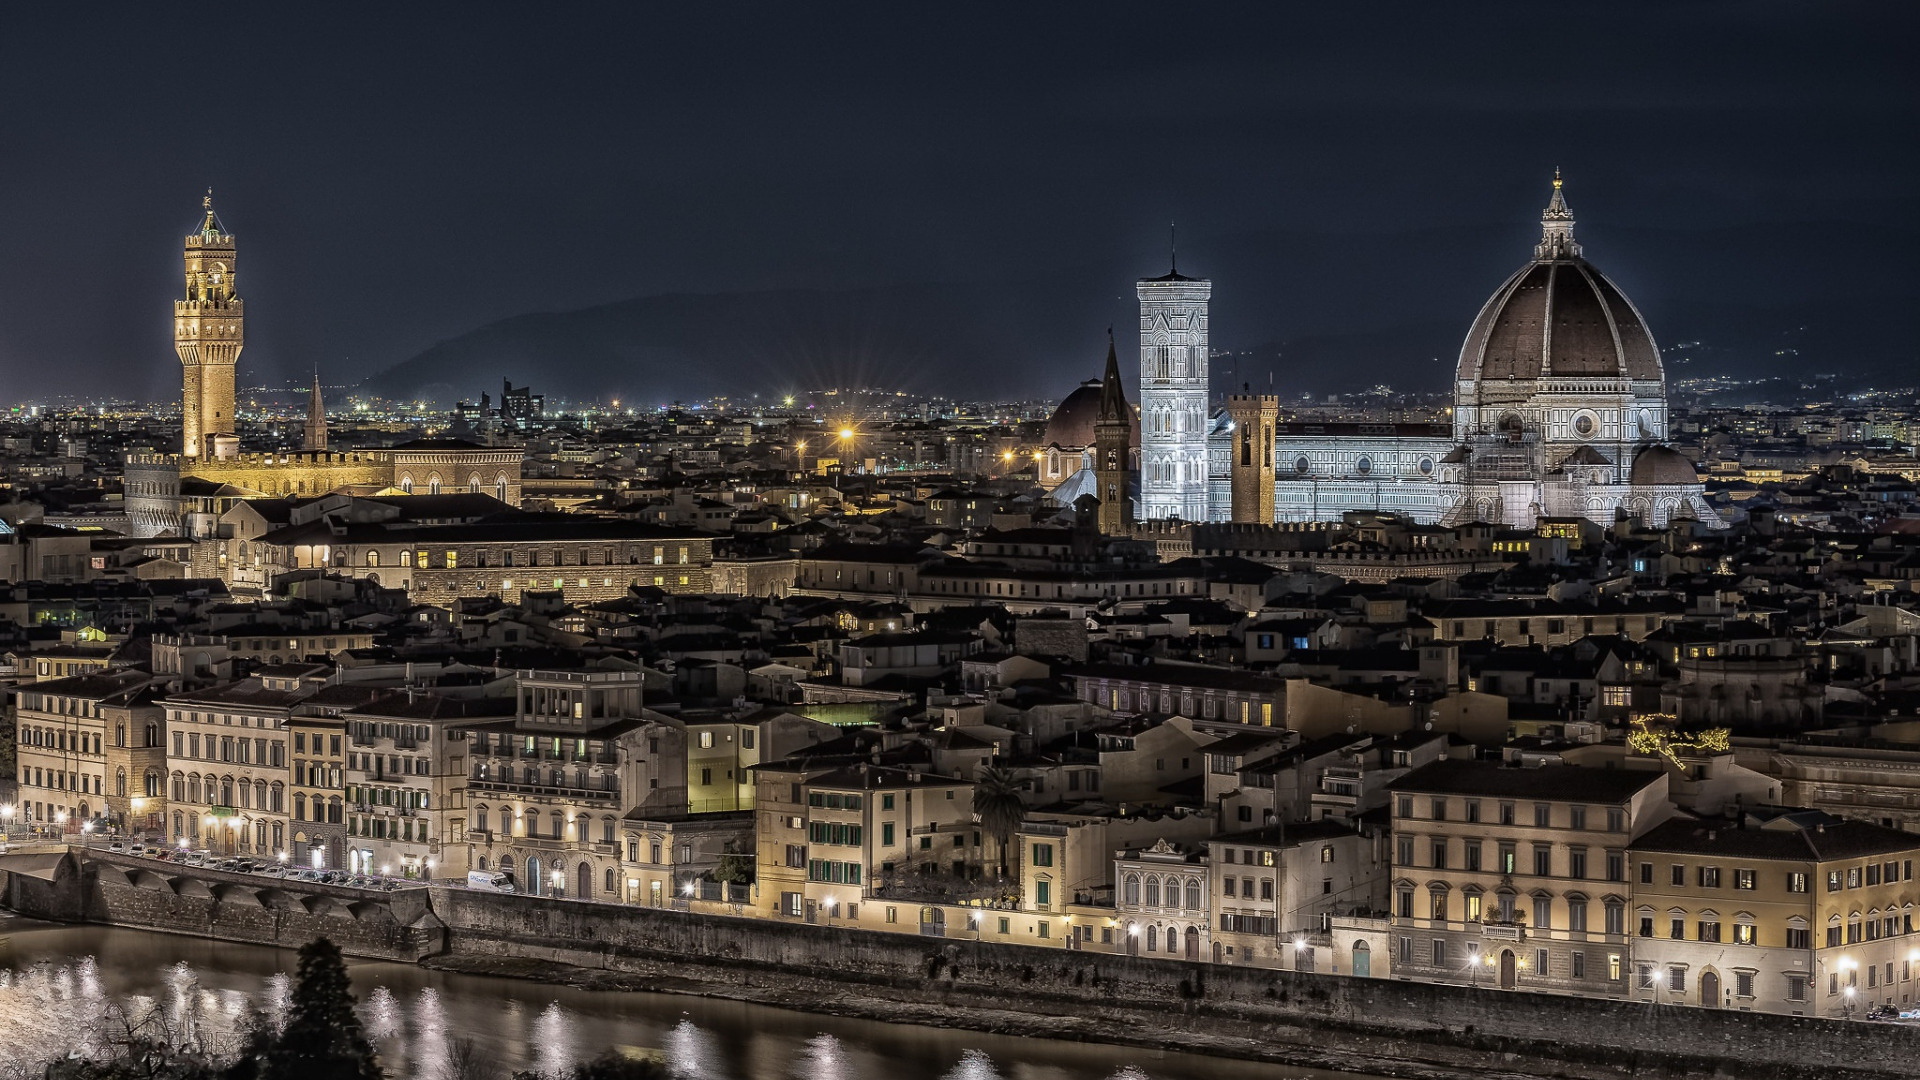 General 1920x1080 architecture building night Florence Italy cityscape old building house river tower cathedral lights hills landmark Europe